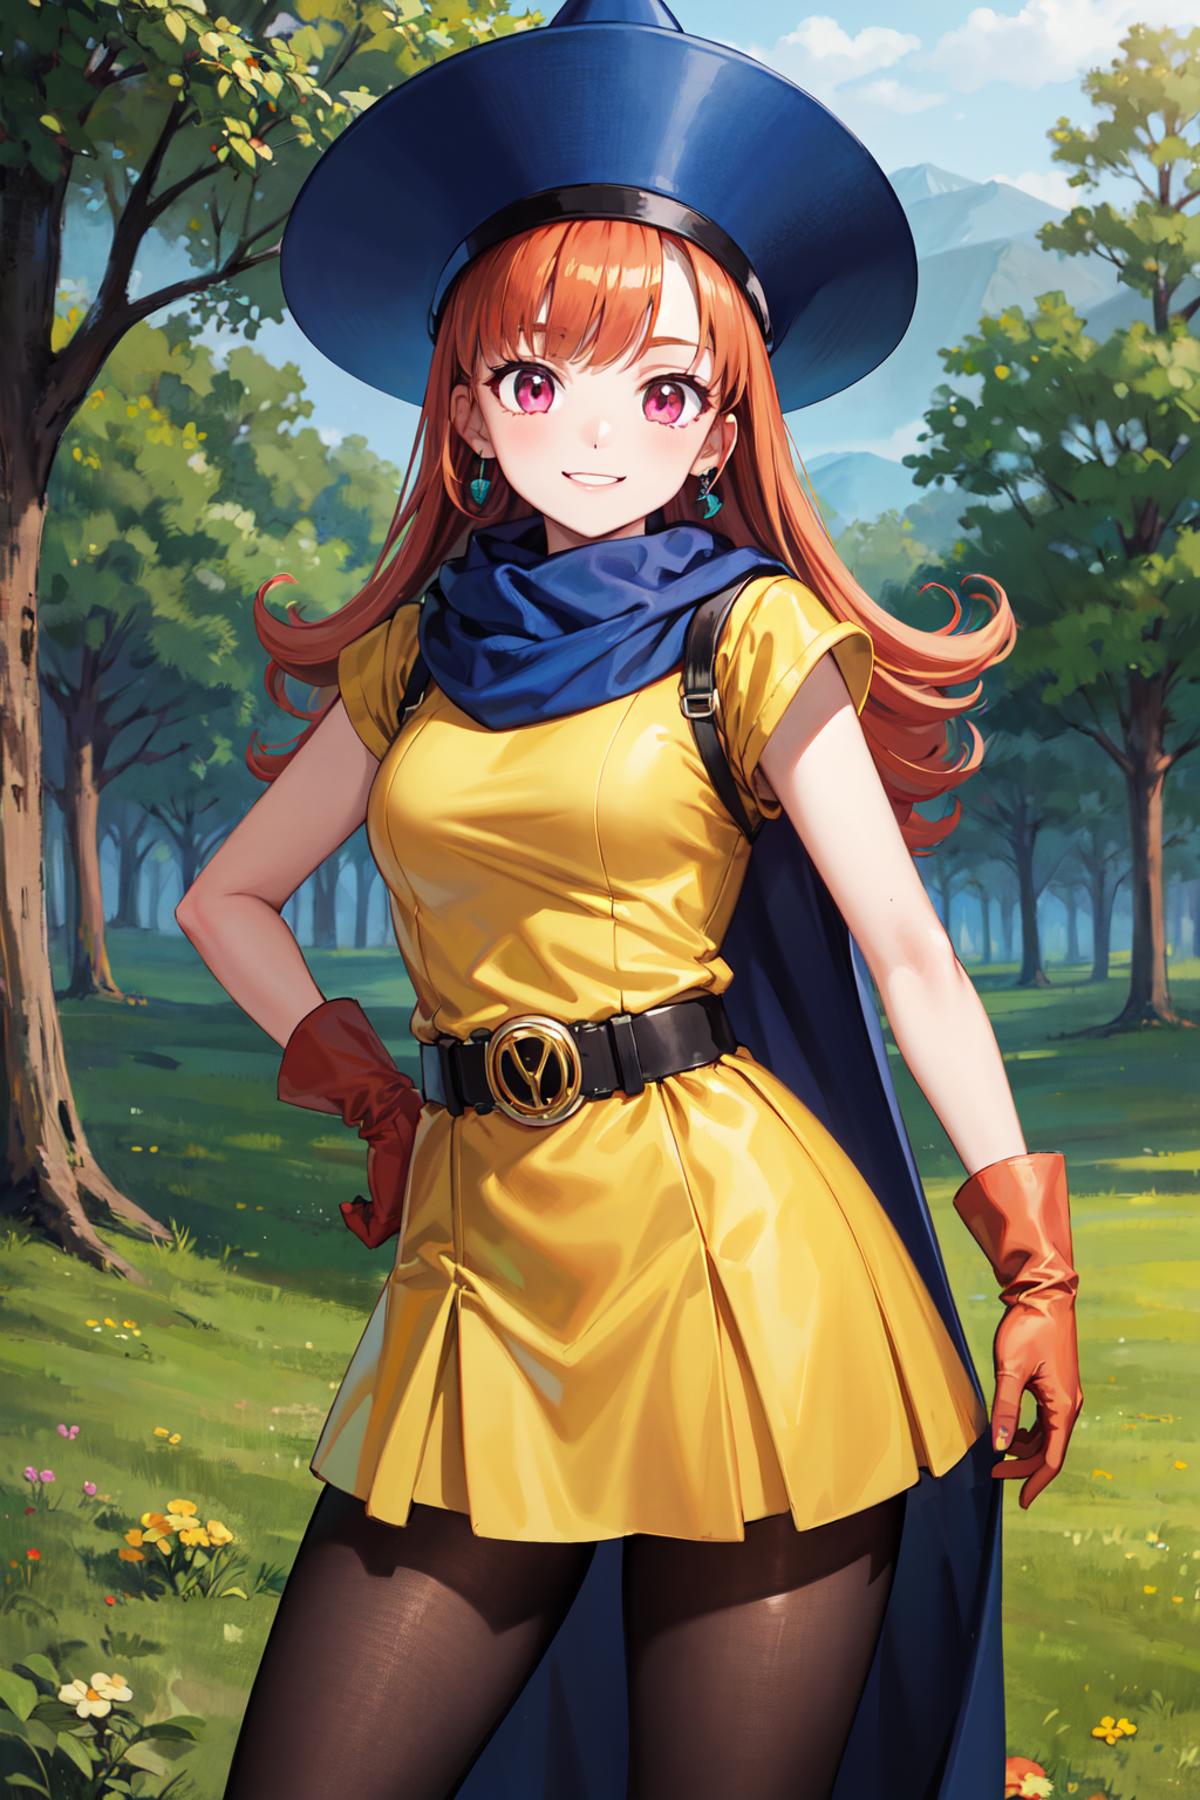 A woman in a yellow dress, blue scarf, and yellow hat, wearing red gloves, stands on a grassy field.